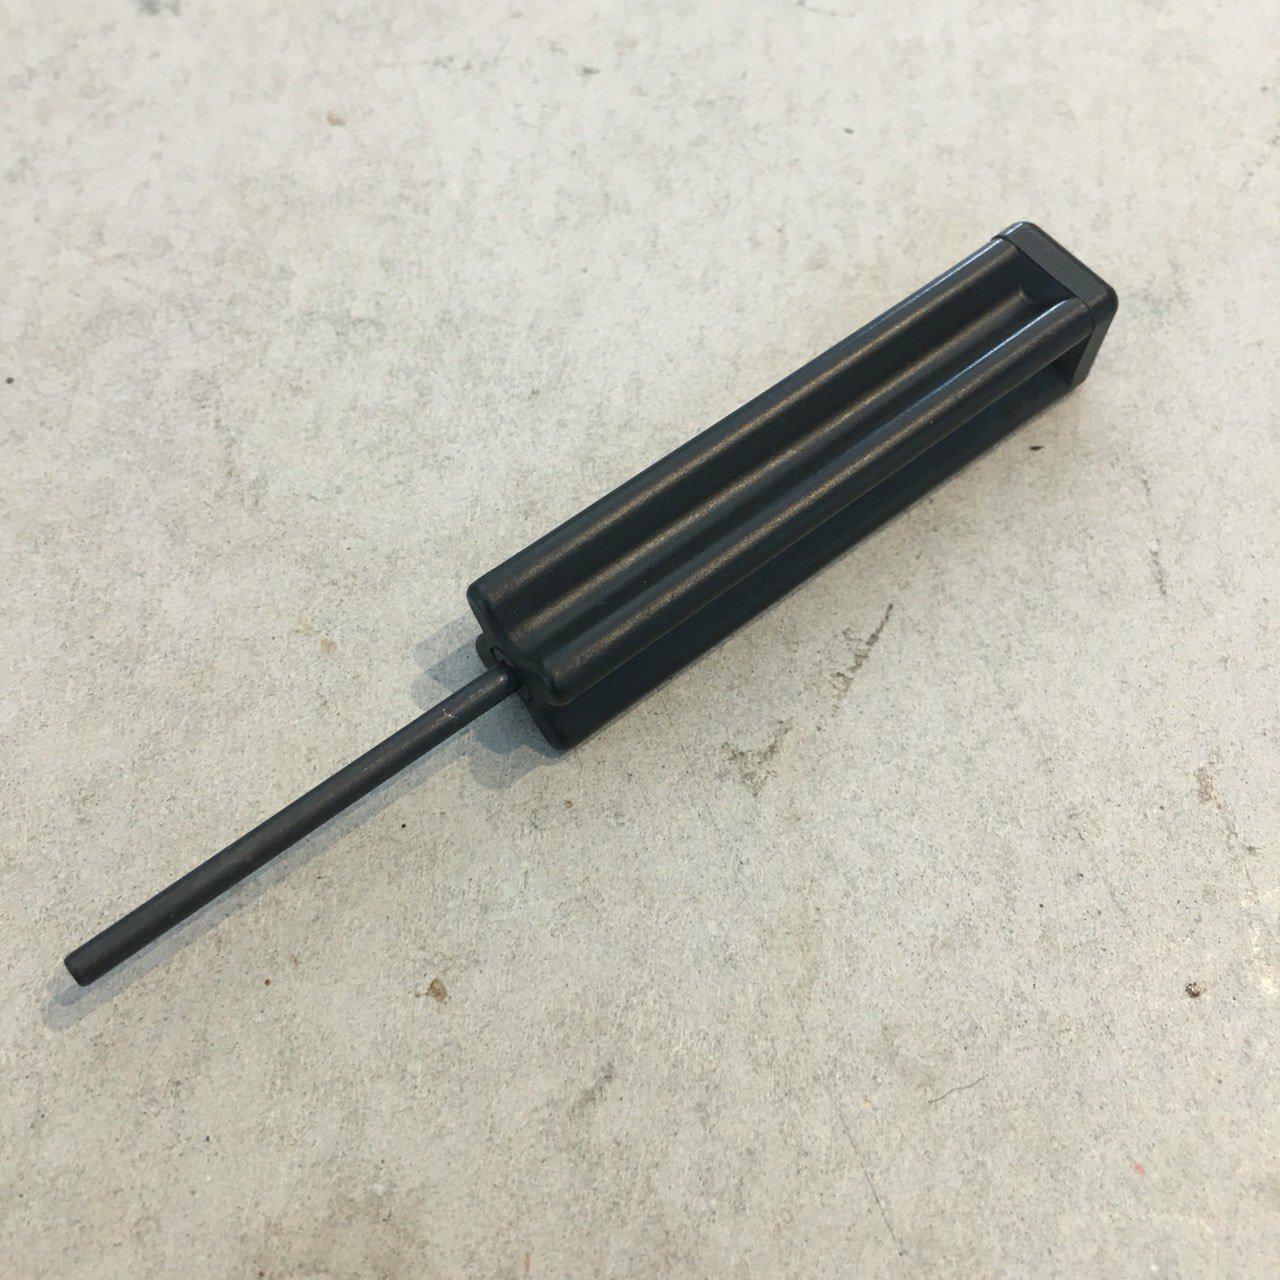 Glock Disassembly Tool 2.5 mm